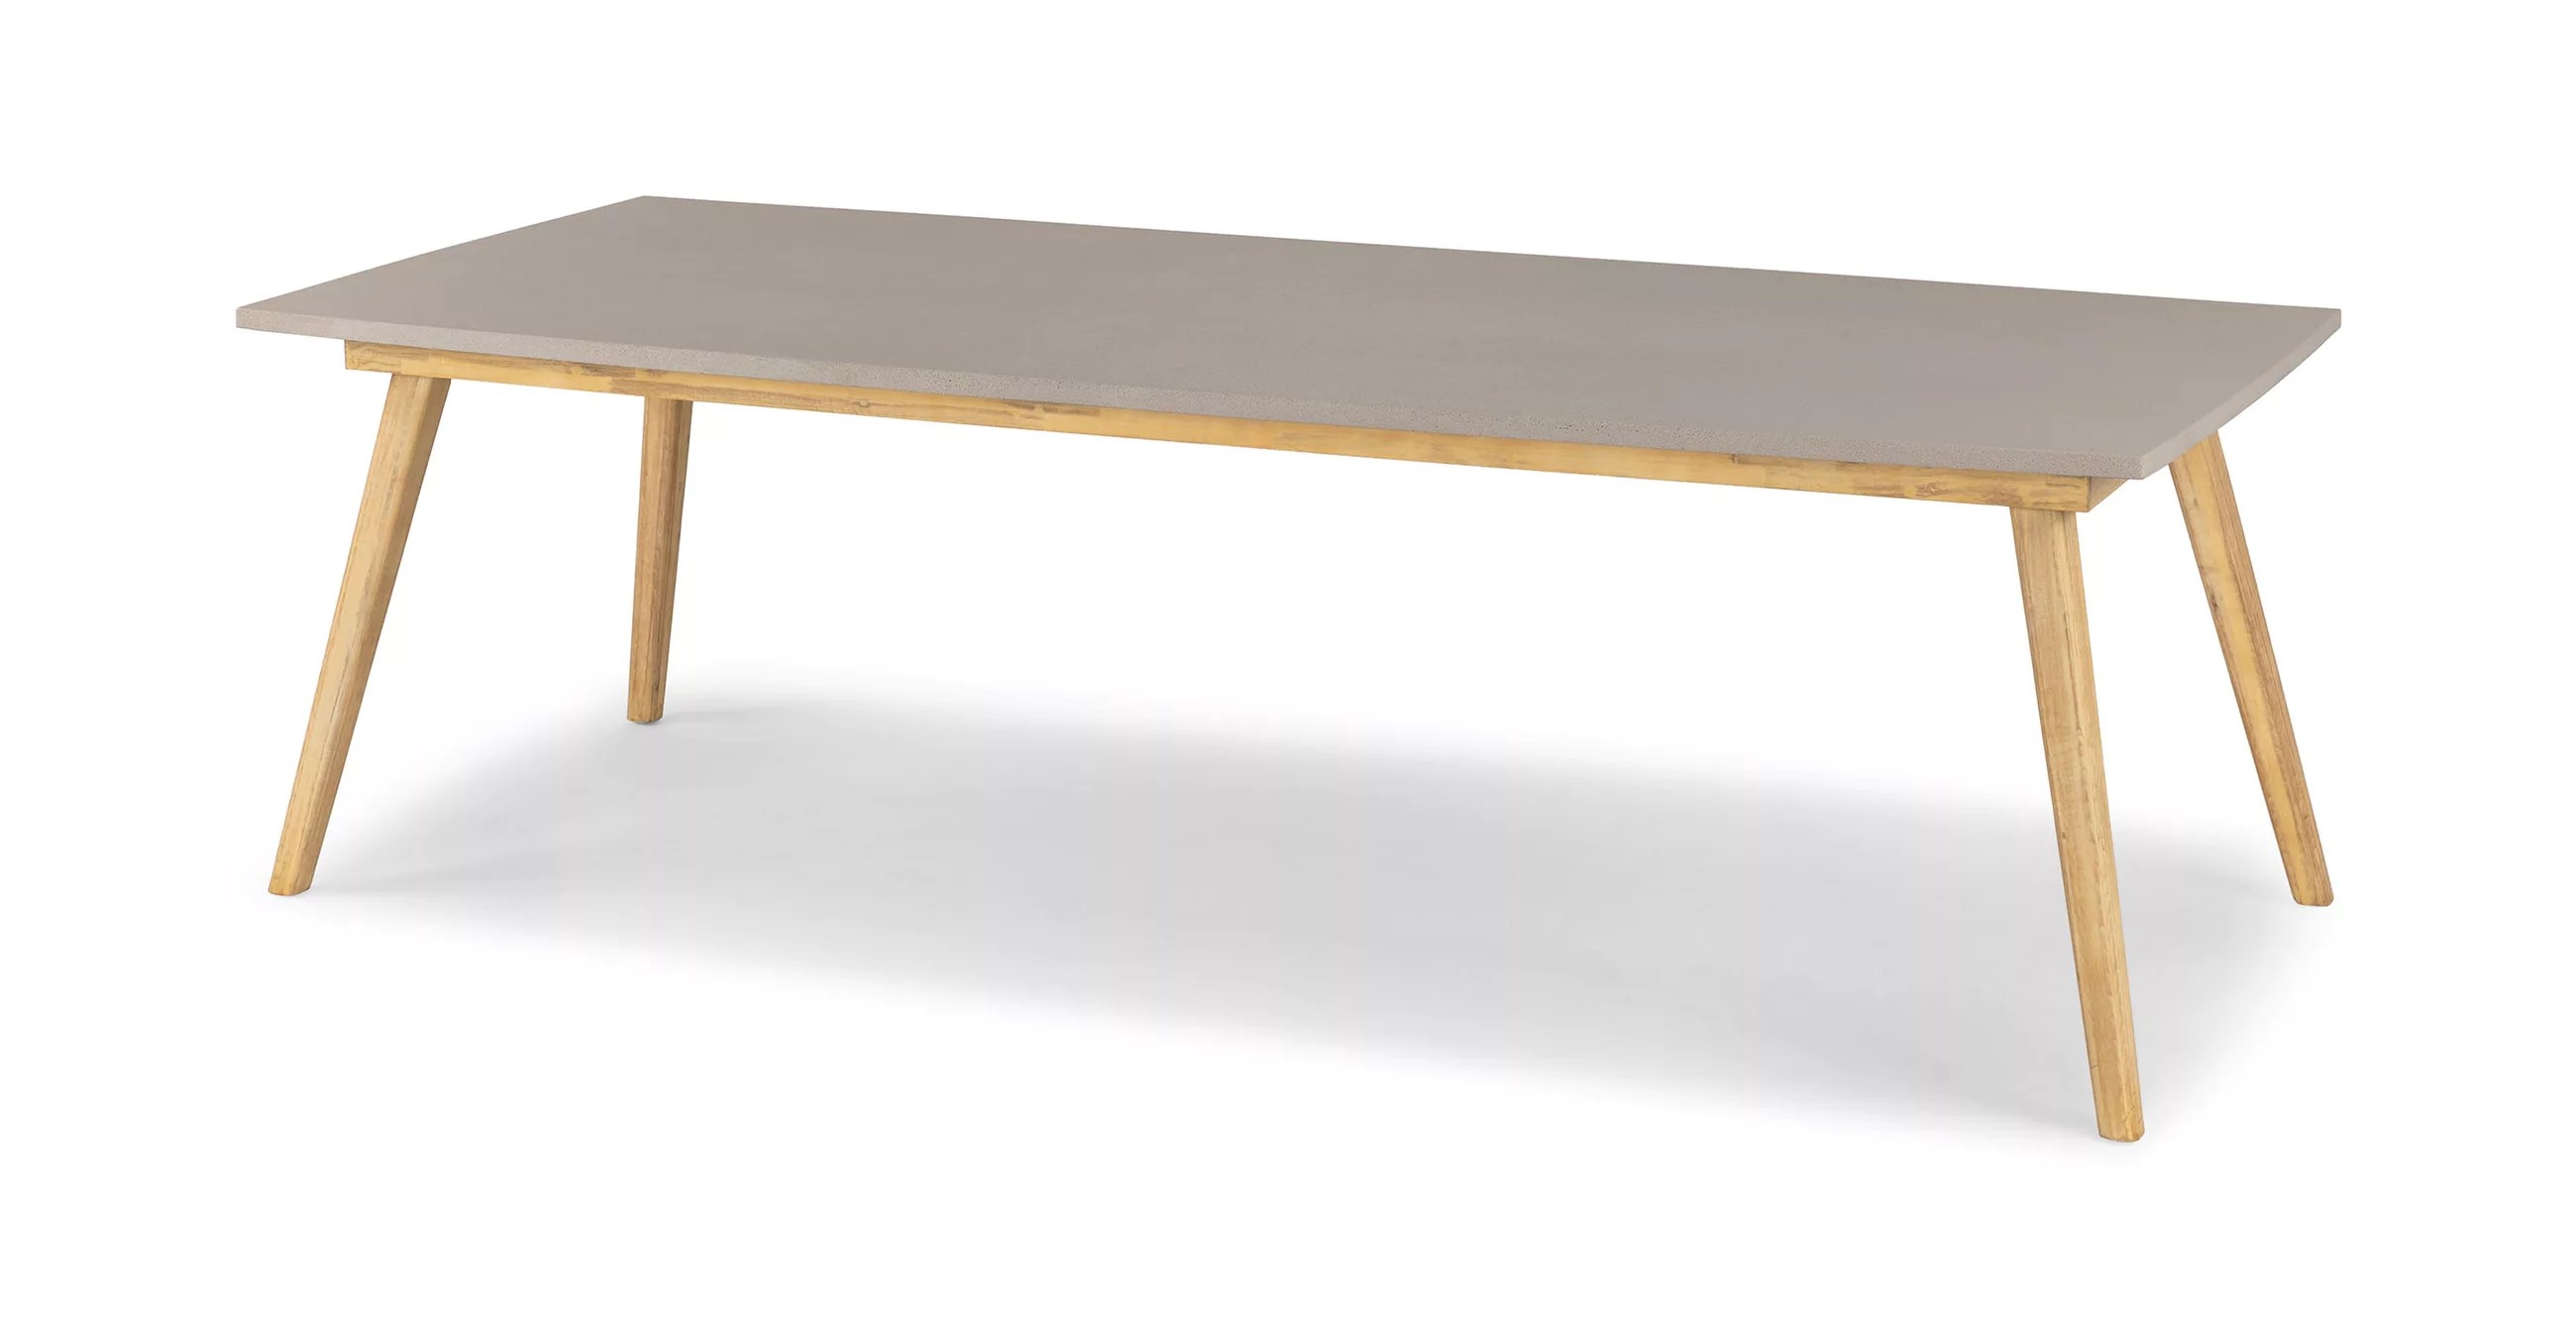 Atra Concrete Dining Table for 8 - Image 0